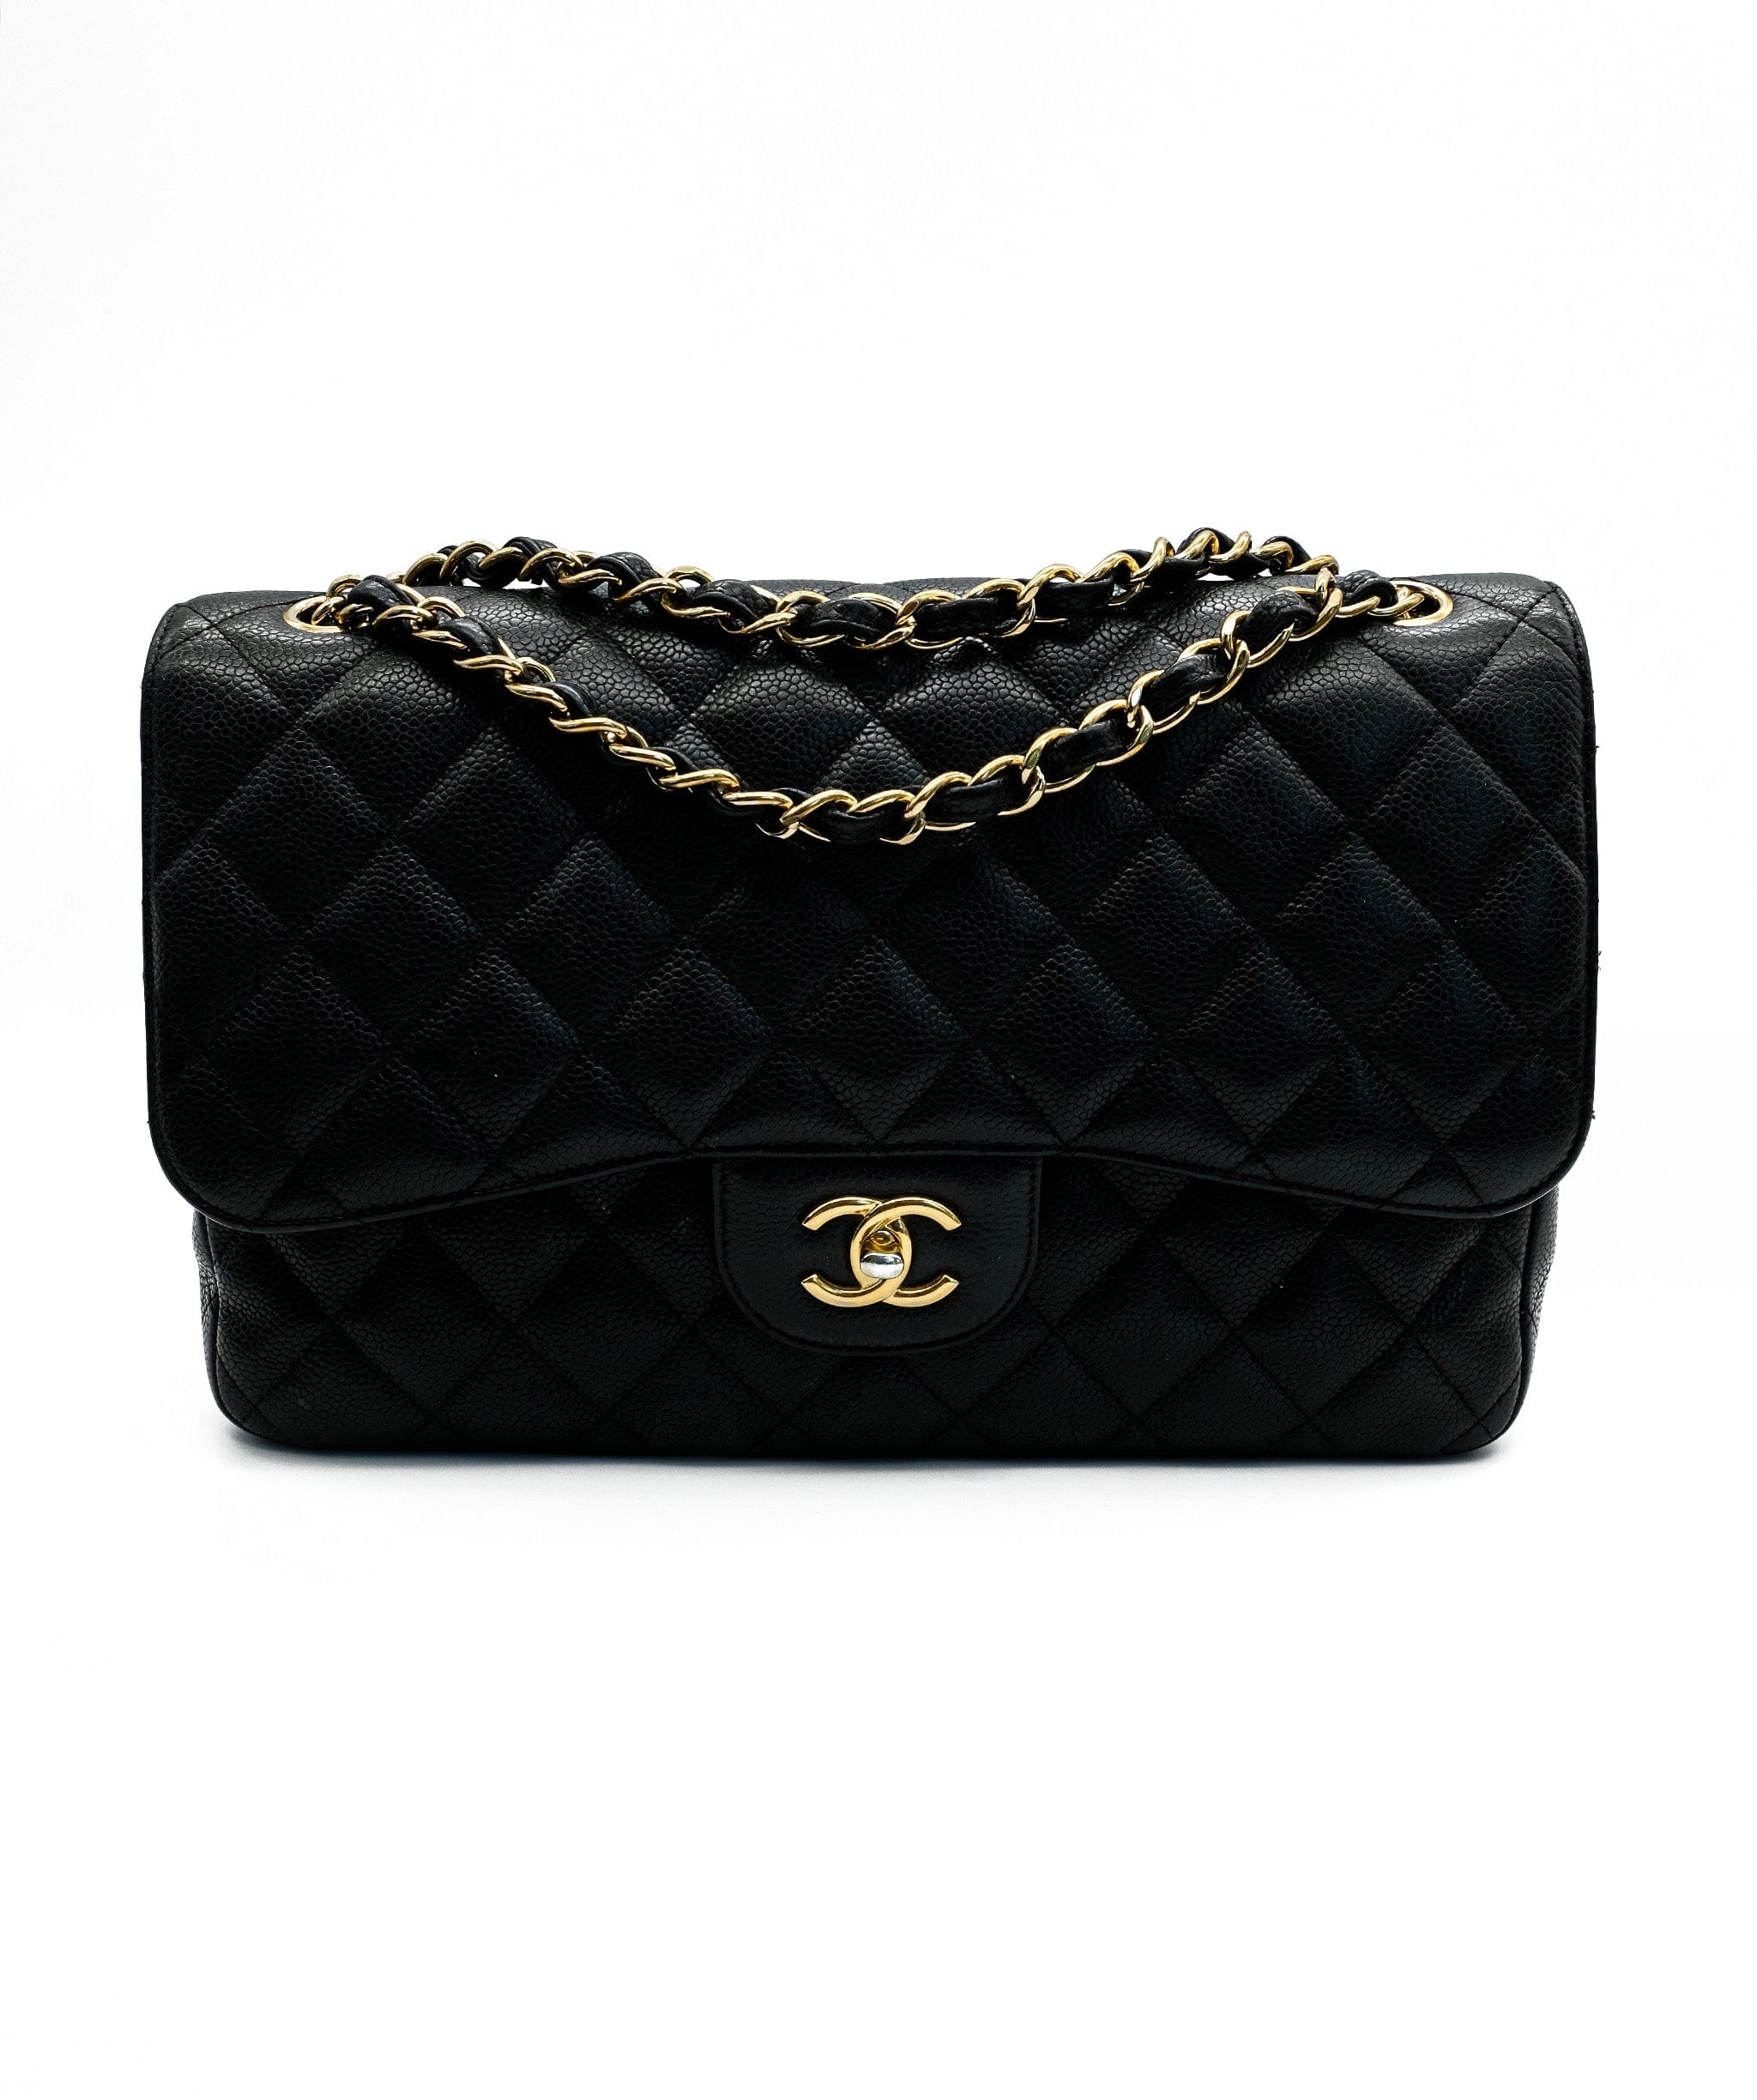 Chanel Chanel Black with Gold Jumbo Classic Flap RJC1607